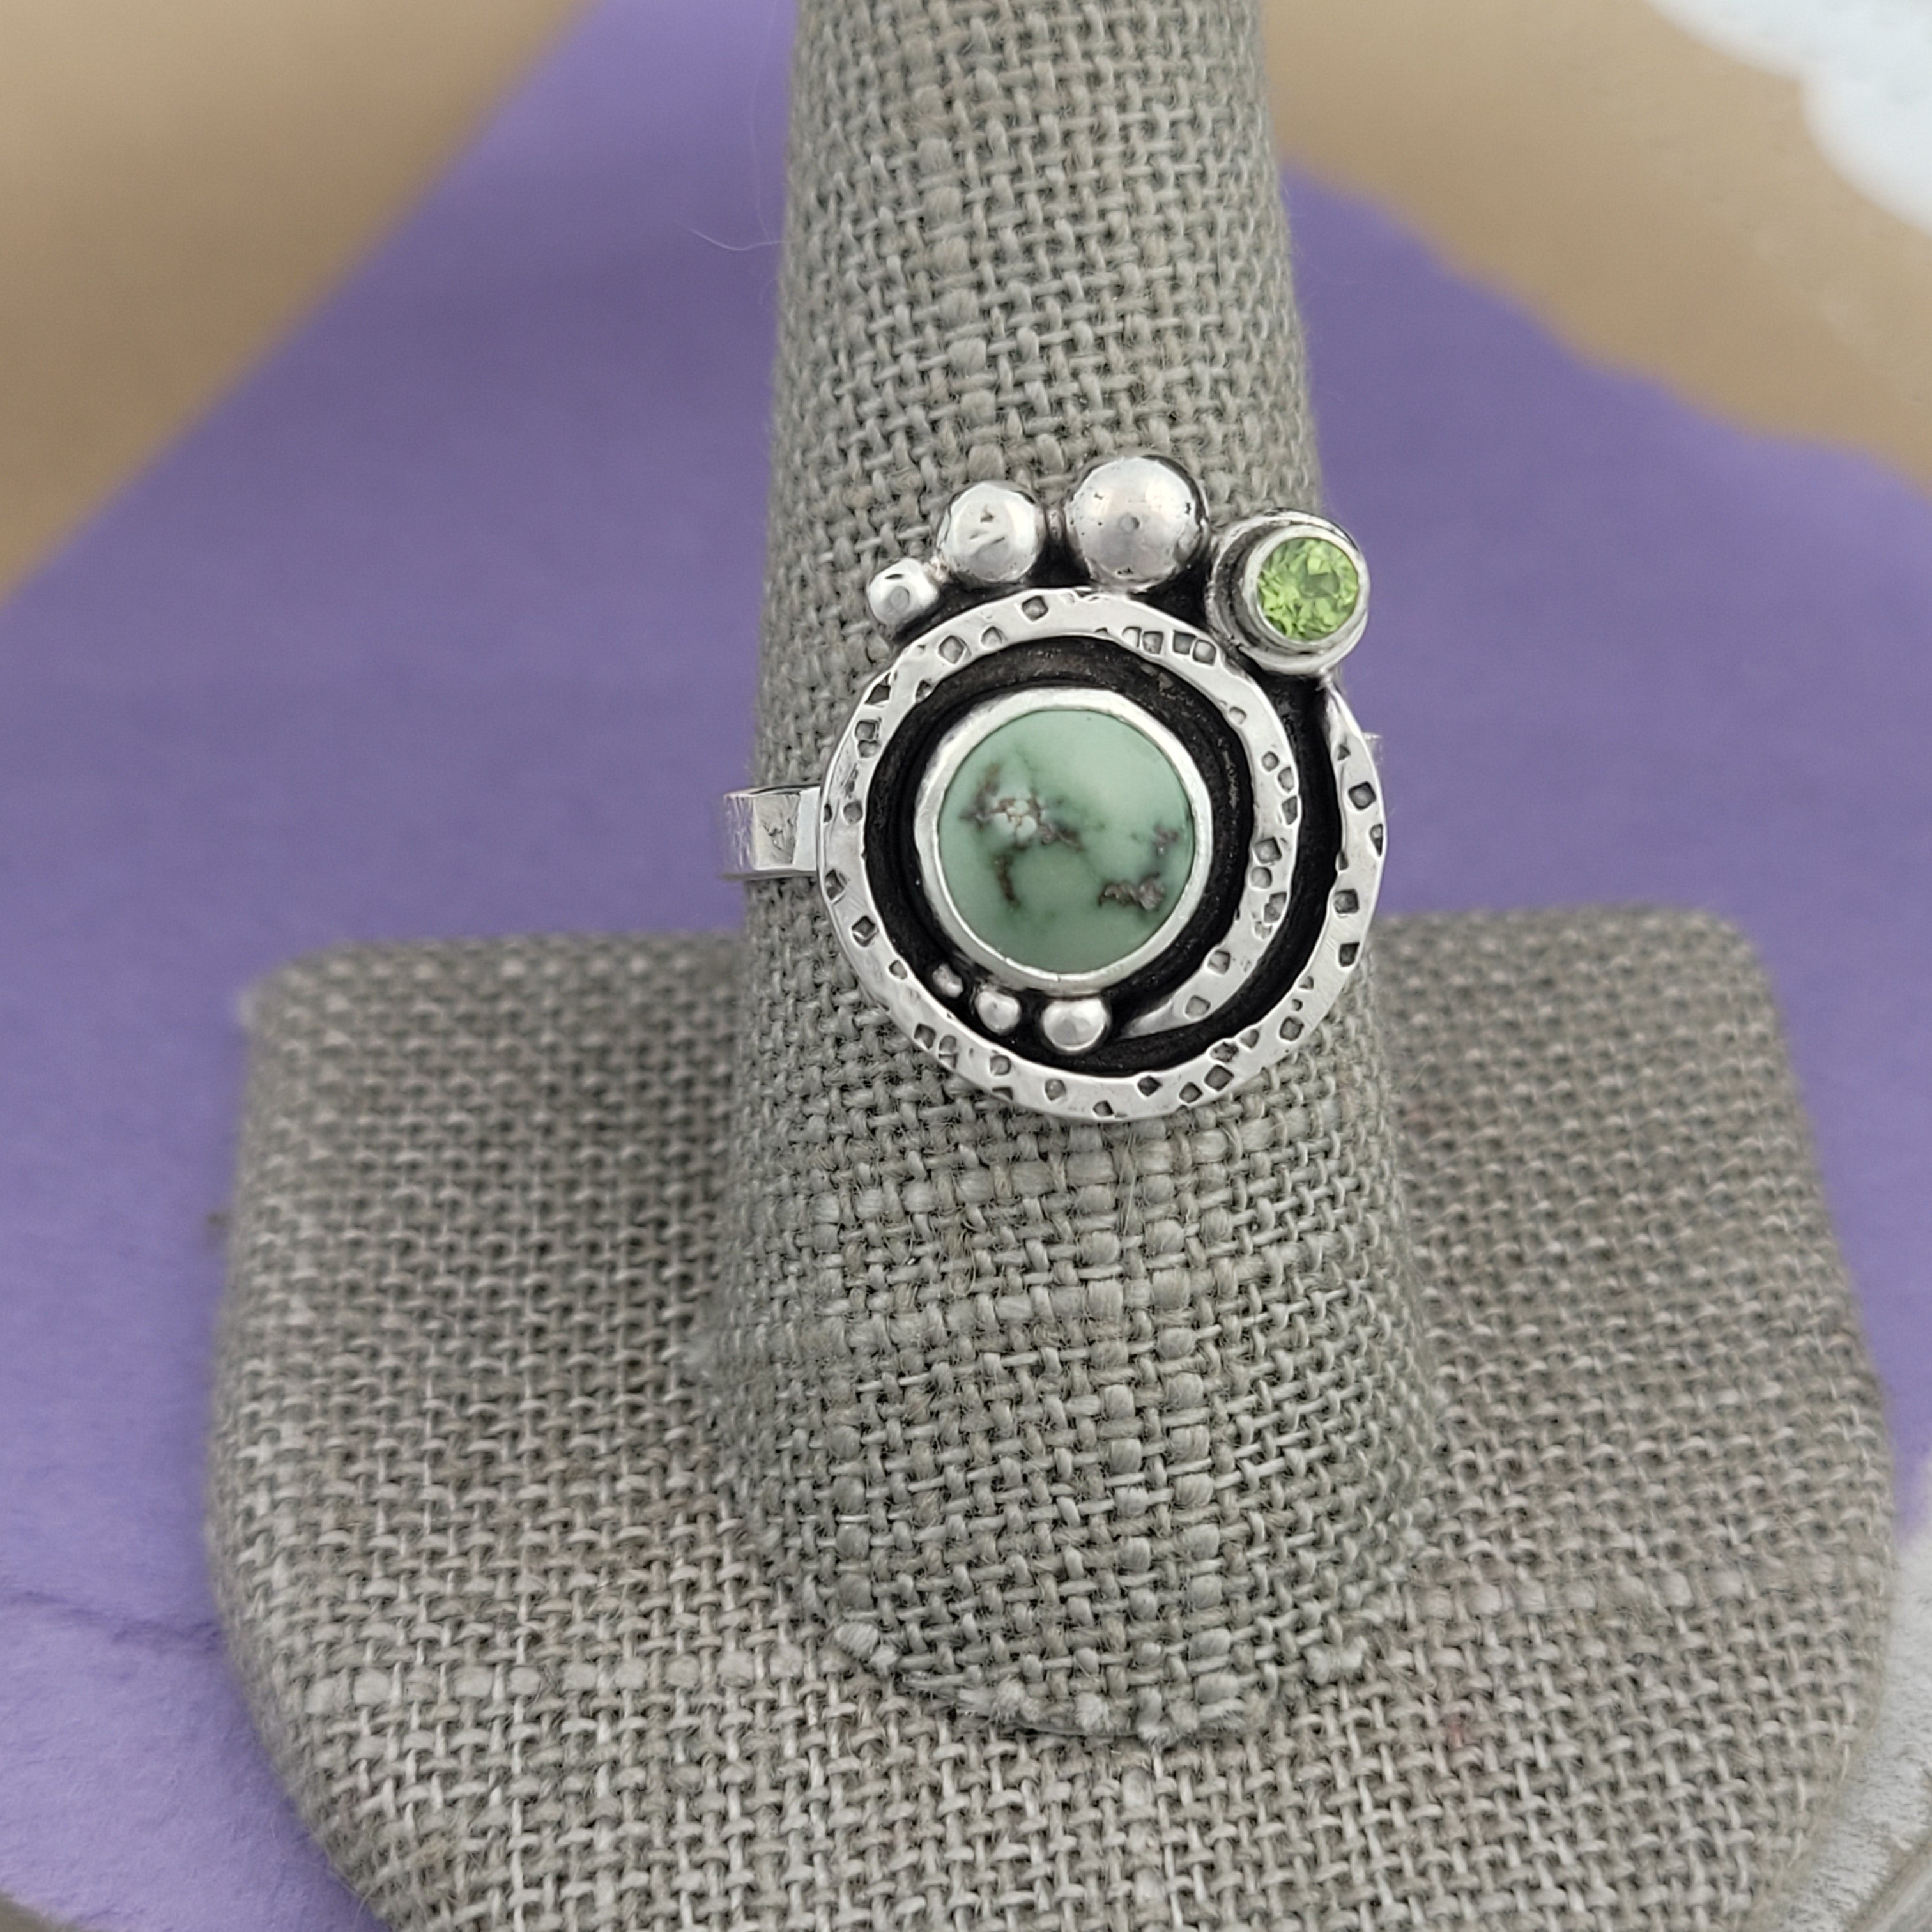 Size 9, Turquoise and Peridot Sterling Silver Ring